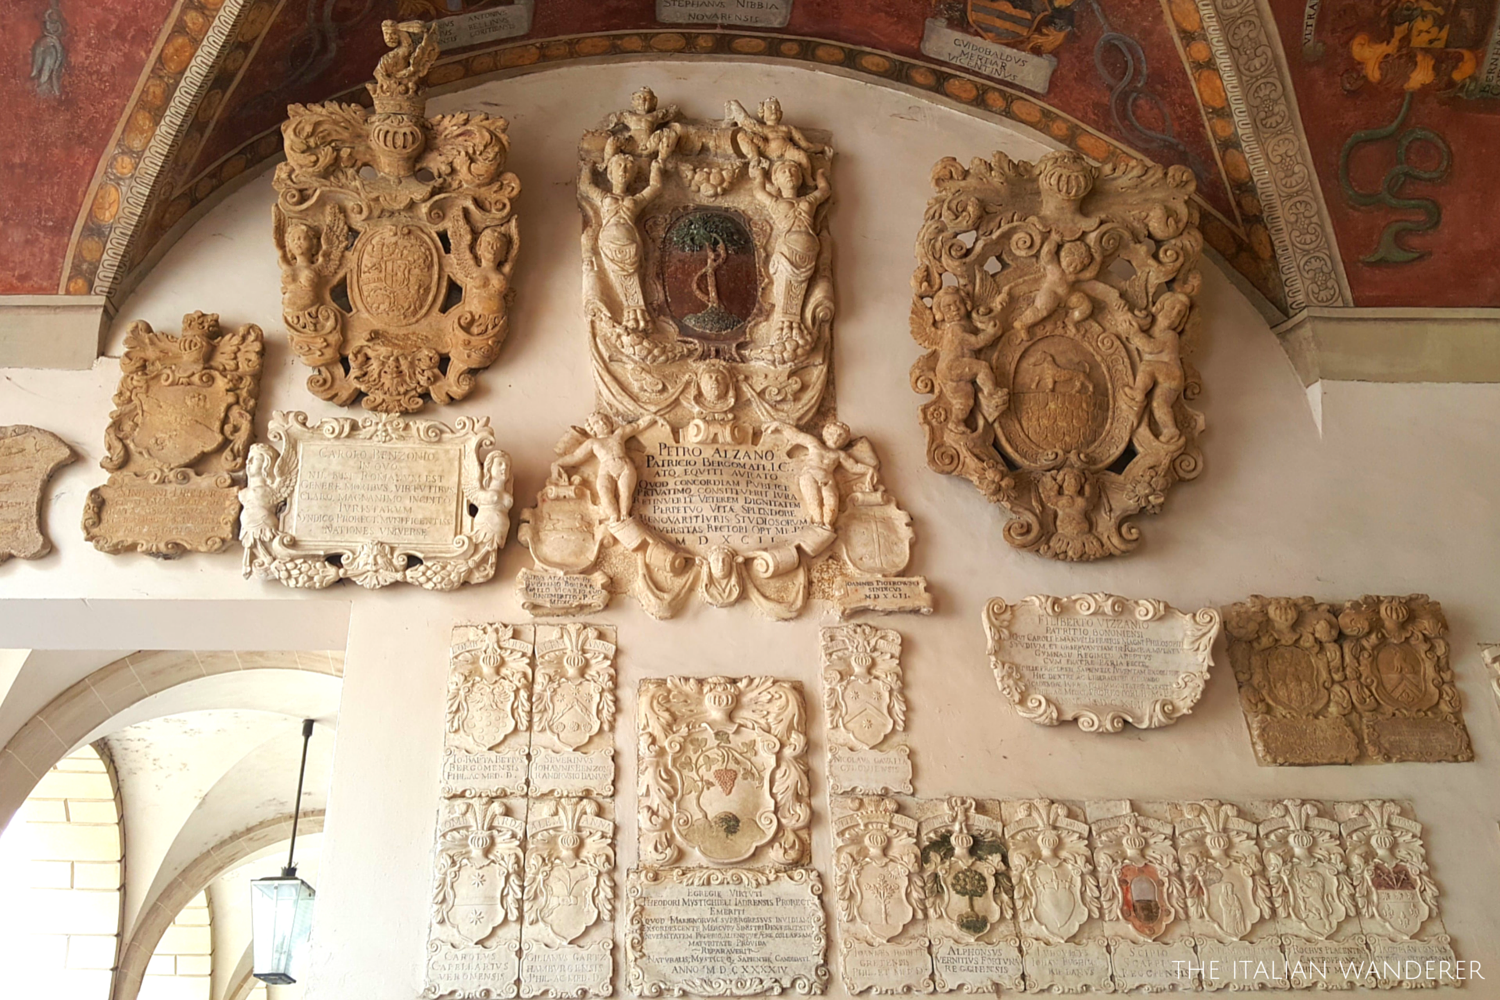 Padua, Palazzo Bo, symbols of the families of the students that attended the university in past times.